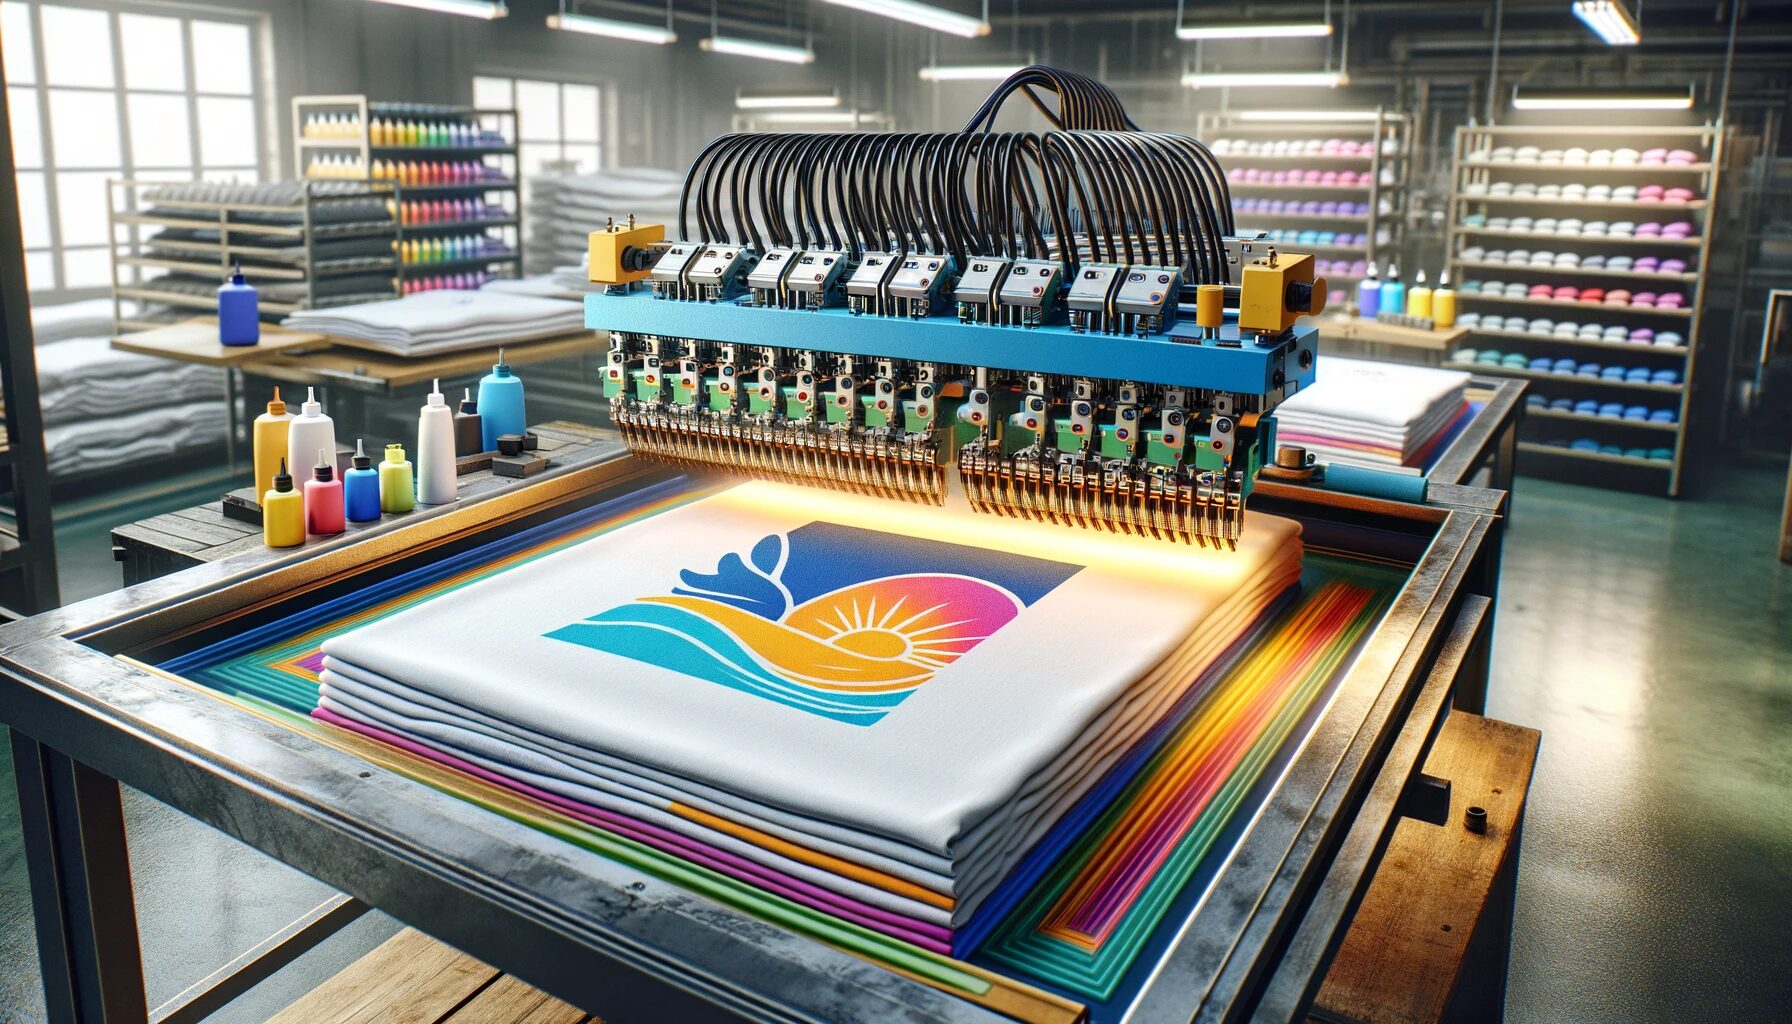 A-realistic-image-of-a-screen-printing-press-in-action-printing-logos-on-t-shirts.-The-scene-is-set-in-a-well-lit-industrial-workshop.-The-machine-h